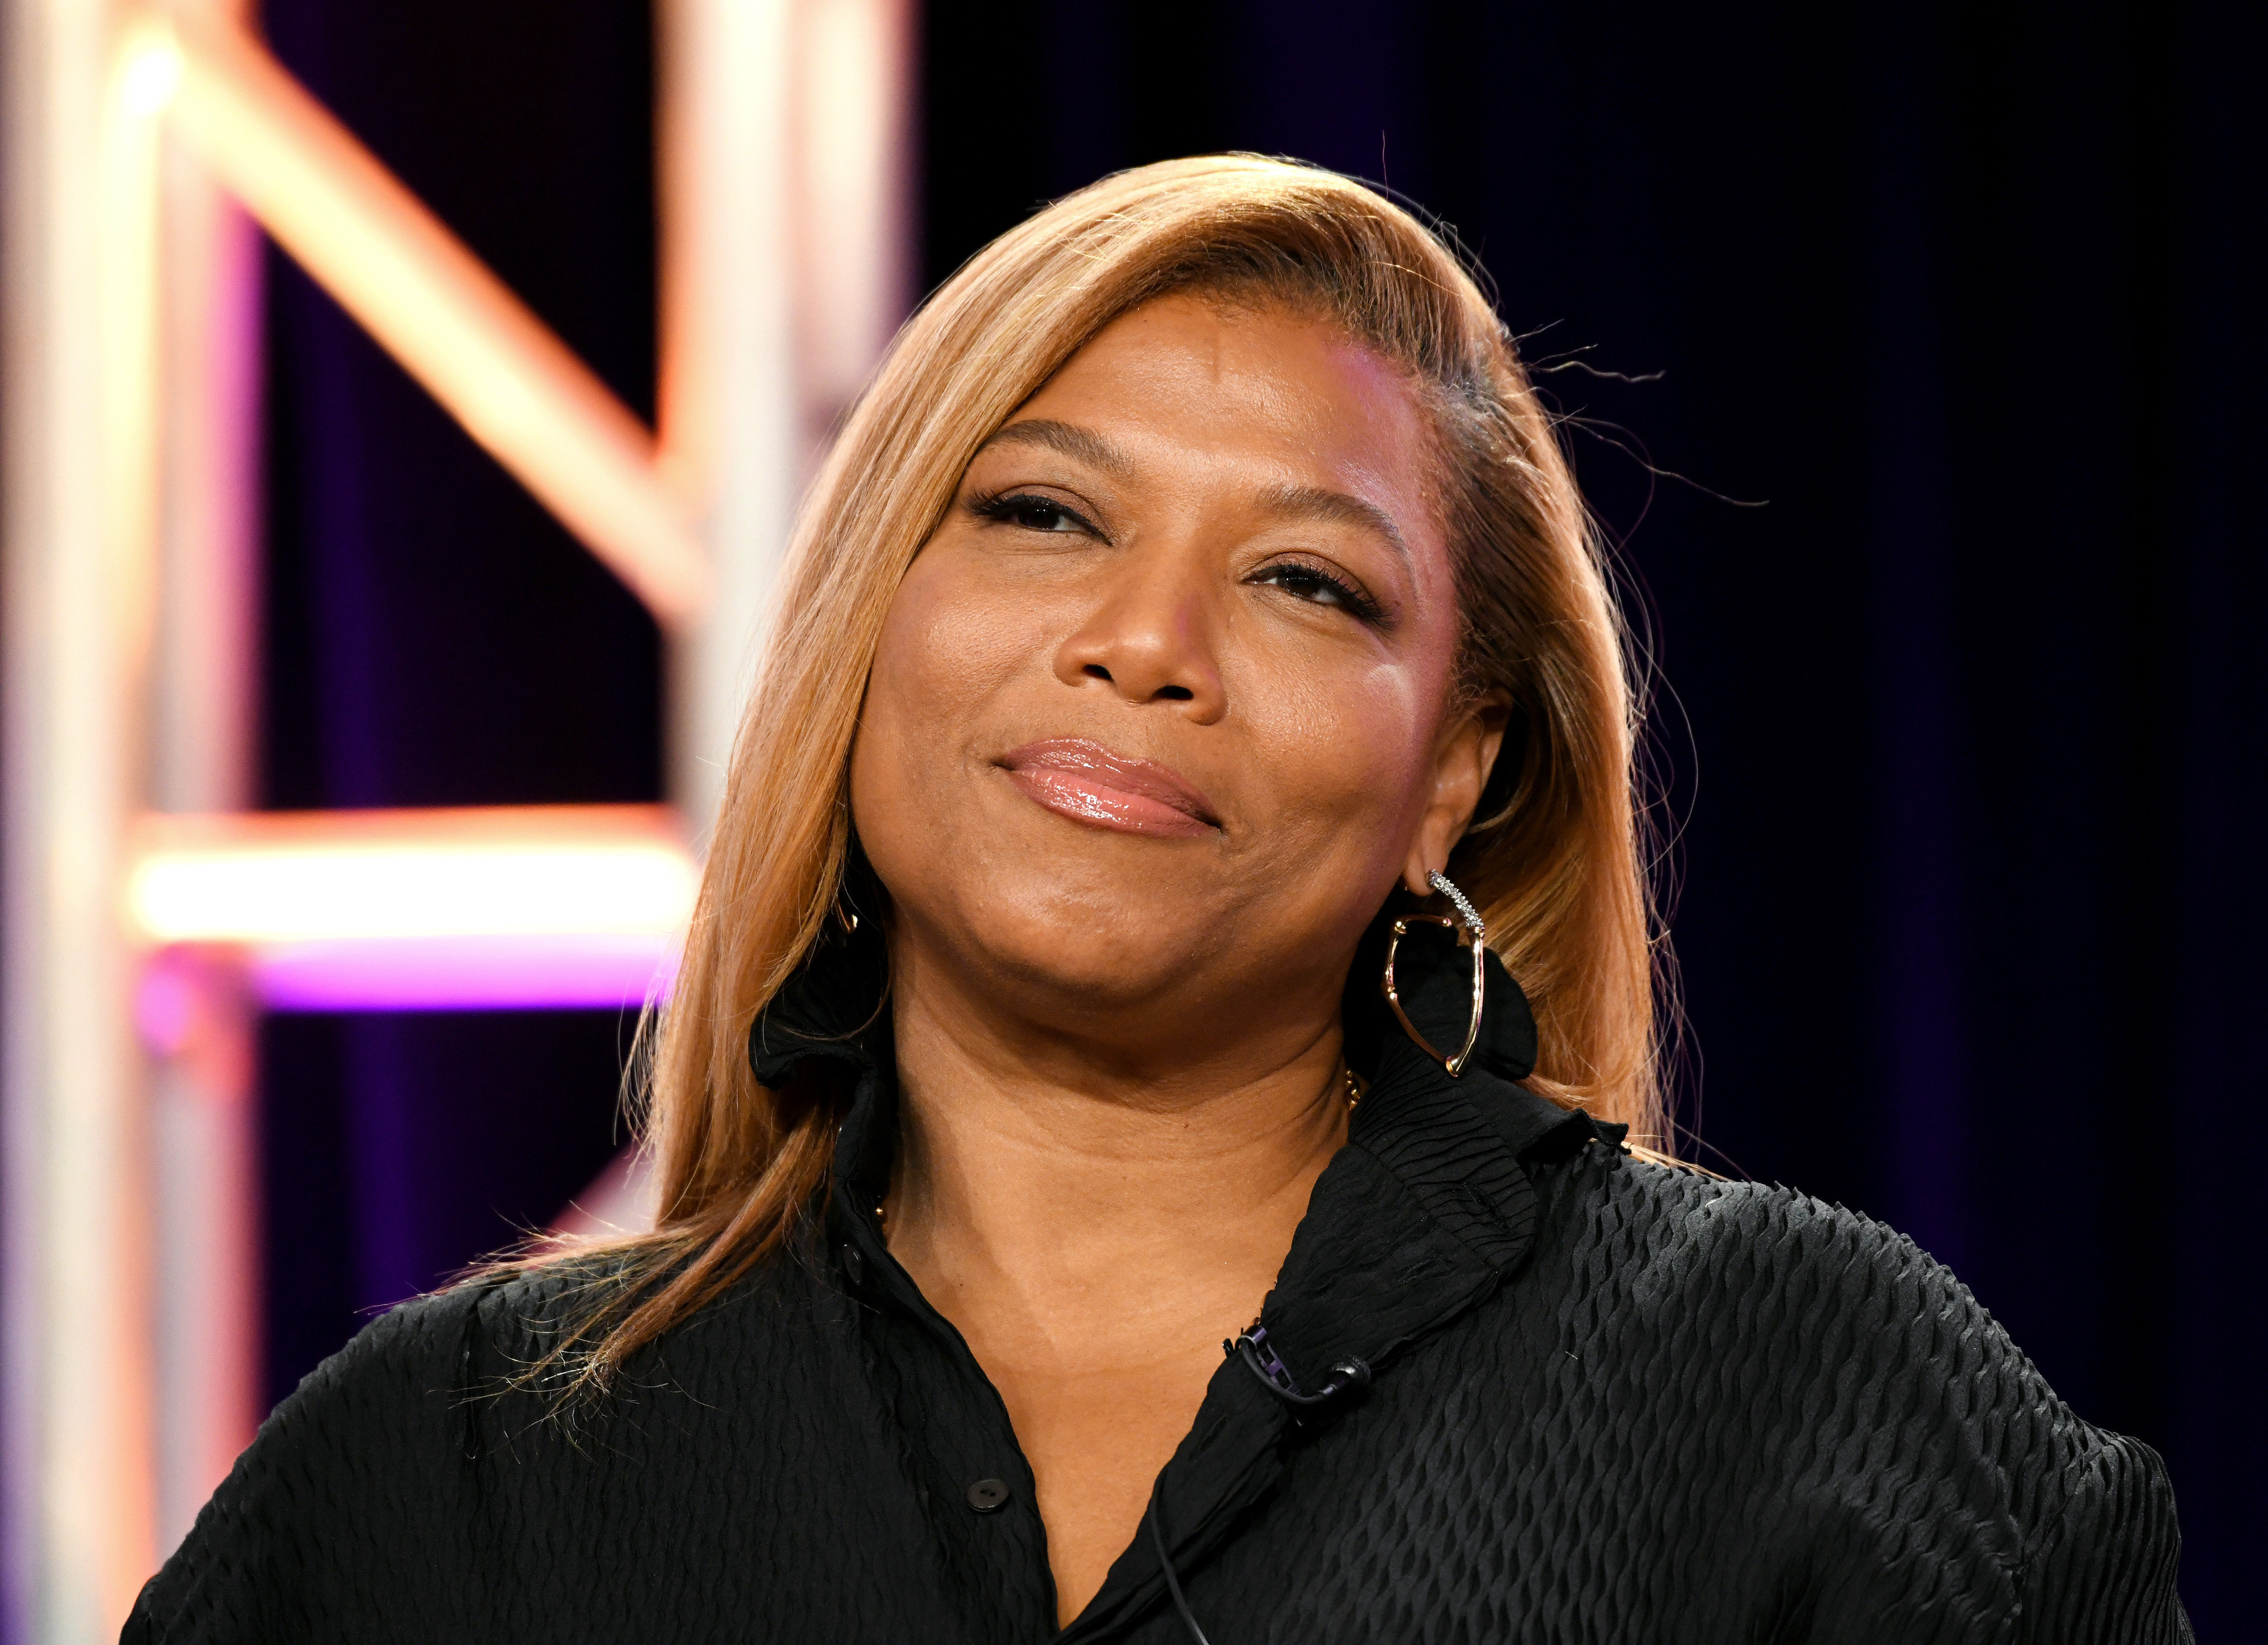 Queen Latifah is seen onstage during Lifetime's TCA Panels on January 18, 2020.